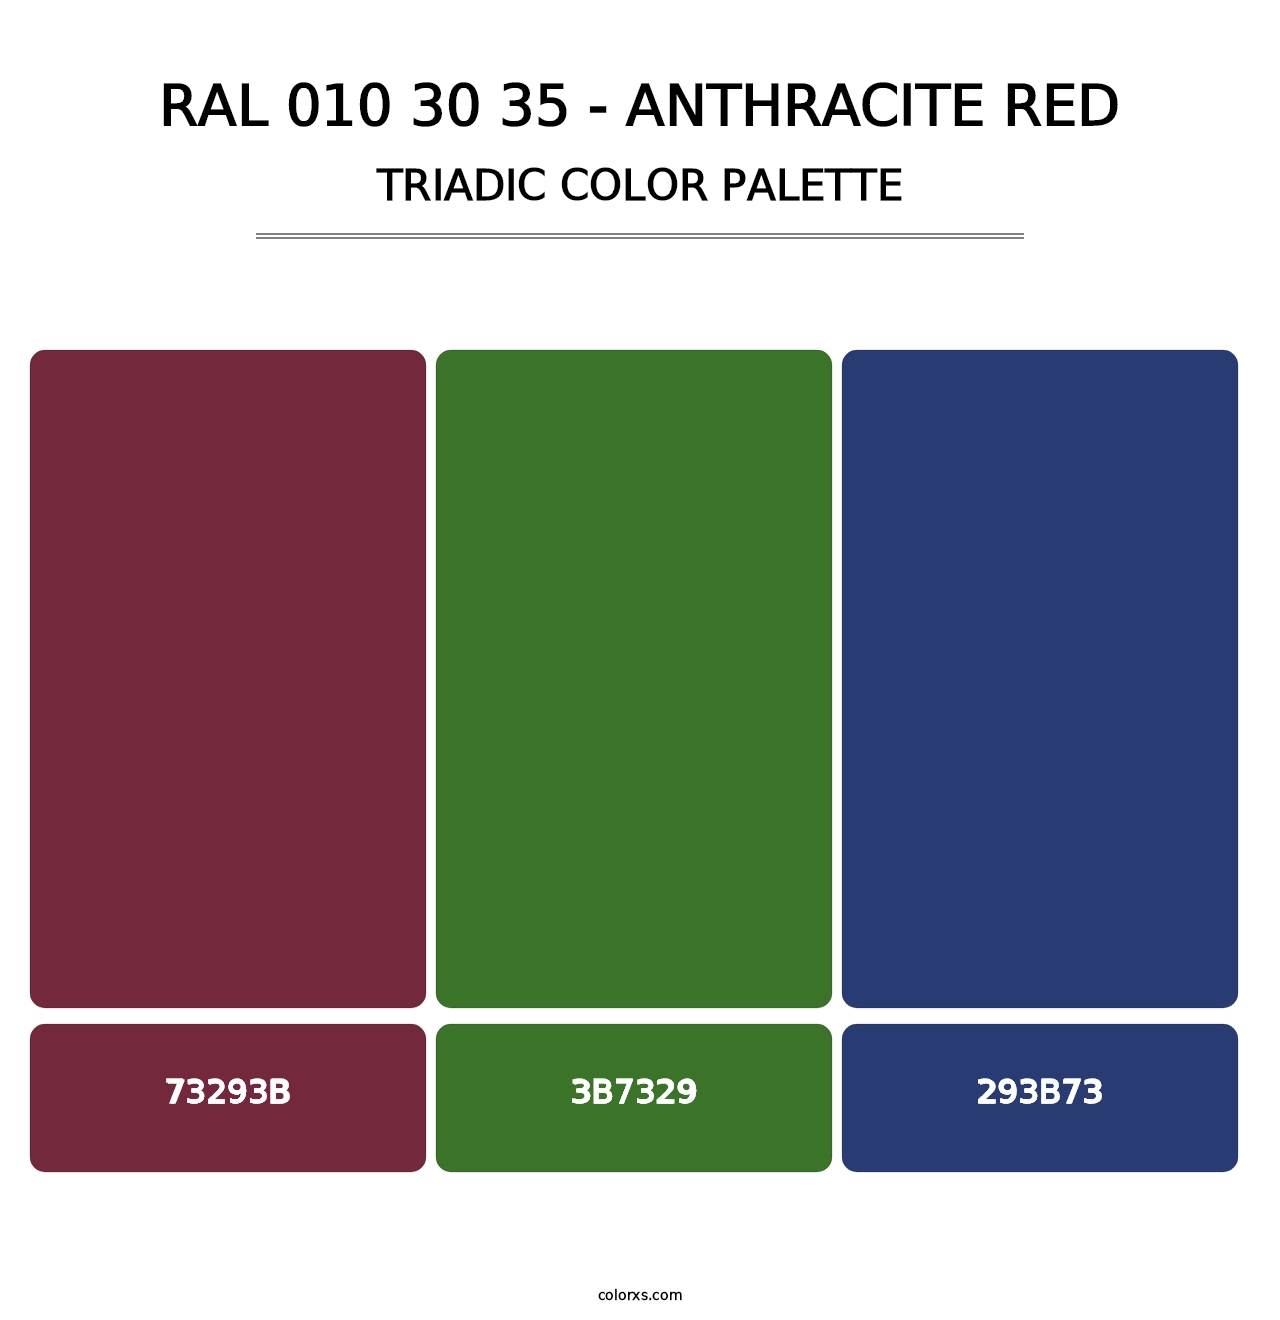 RAL 010 30 35 - Anthracite Red - Triadic Color Palette